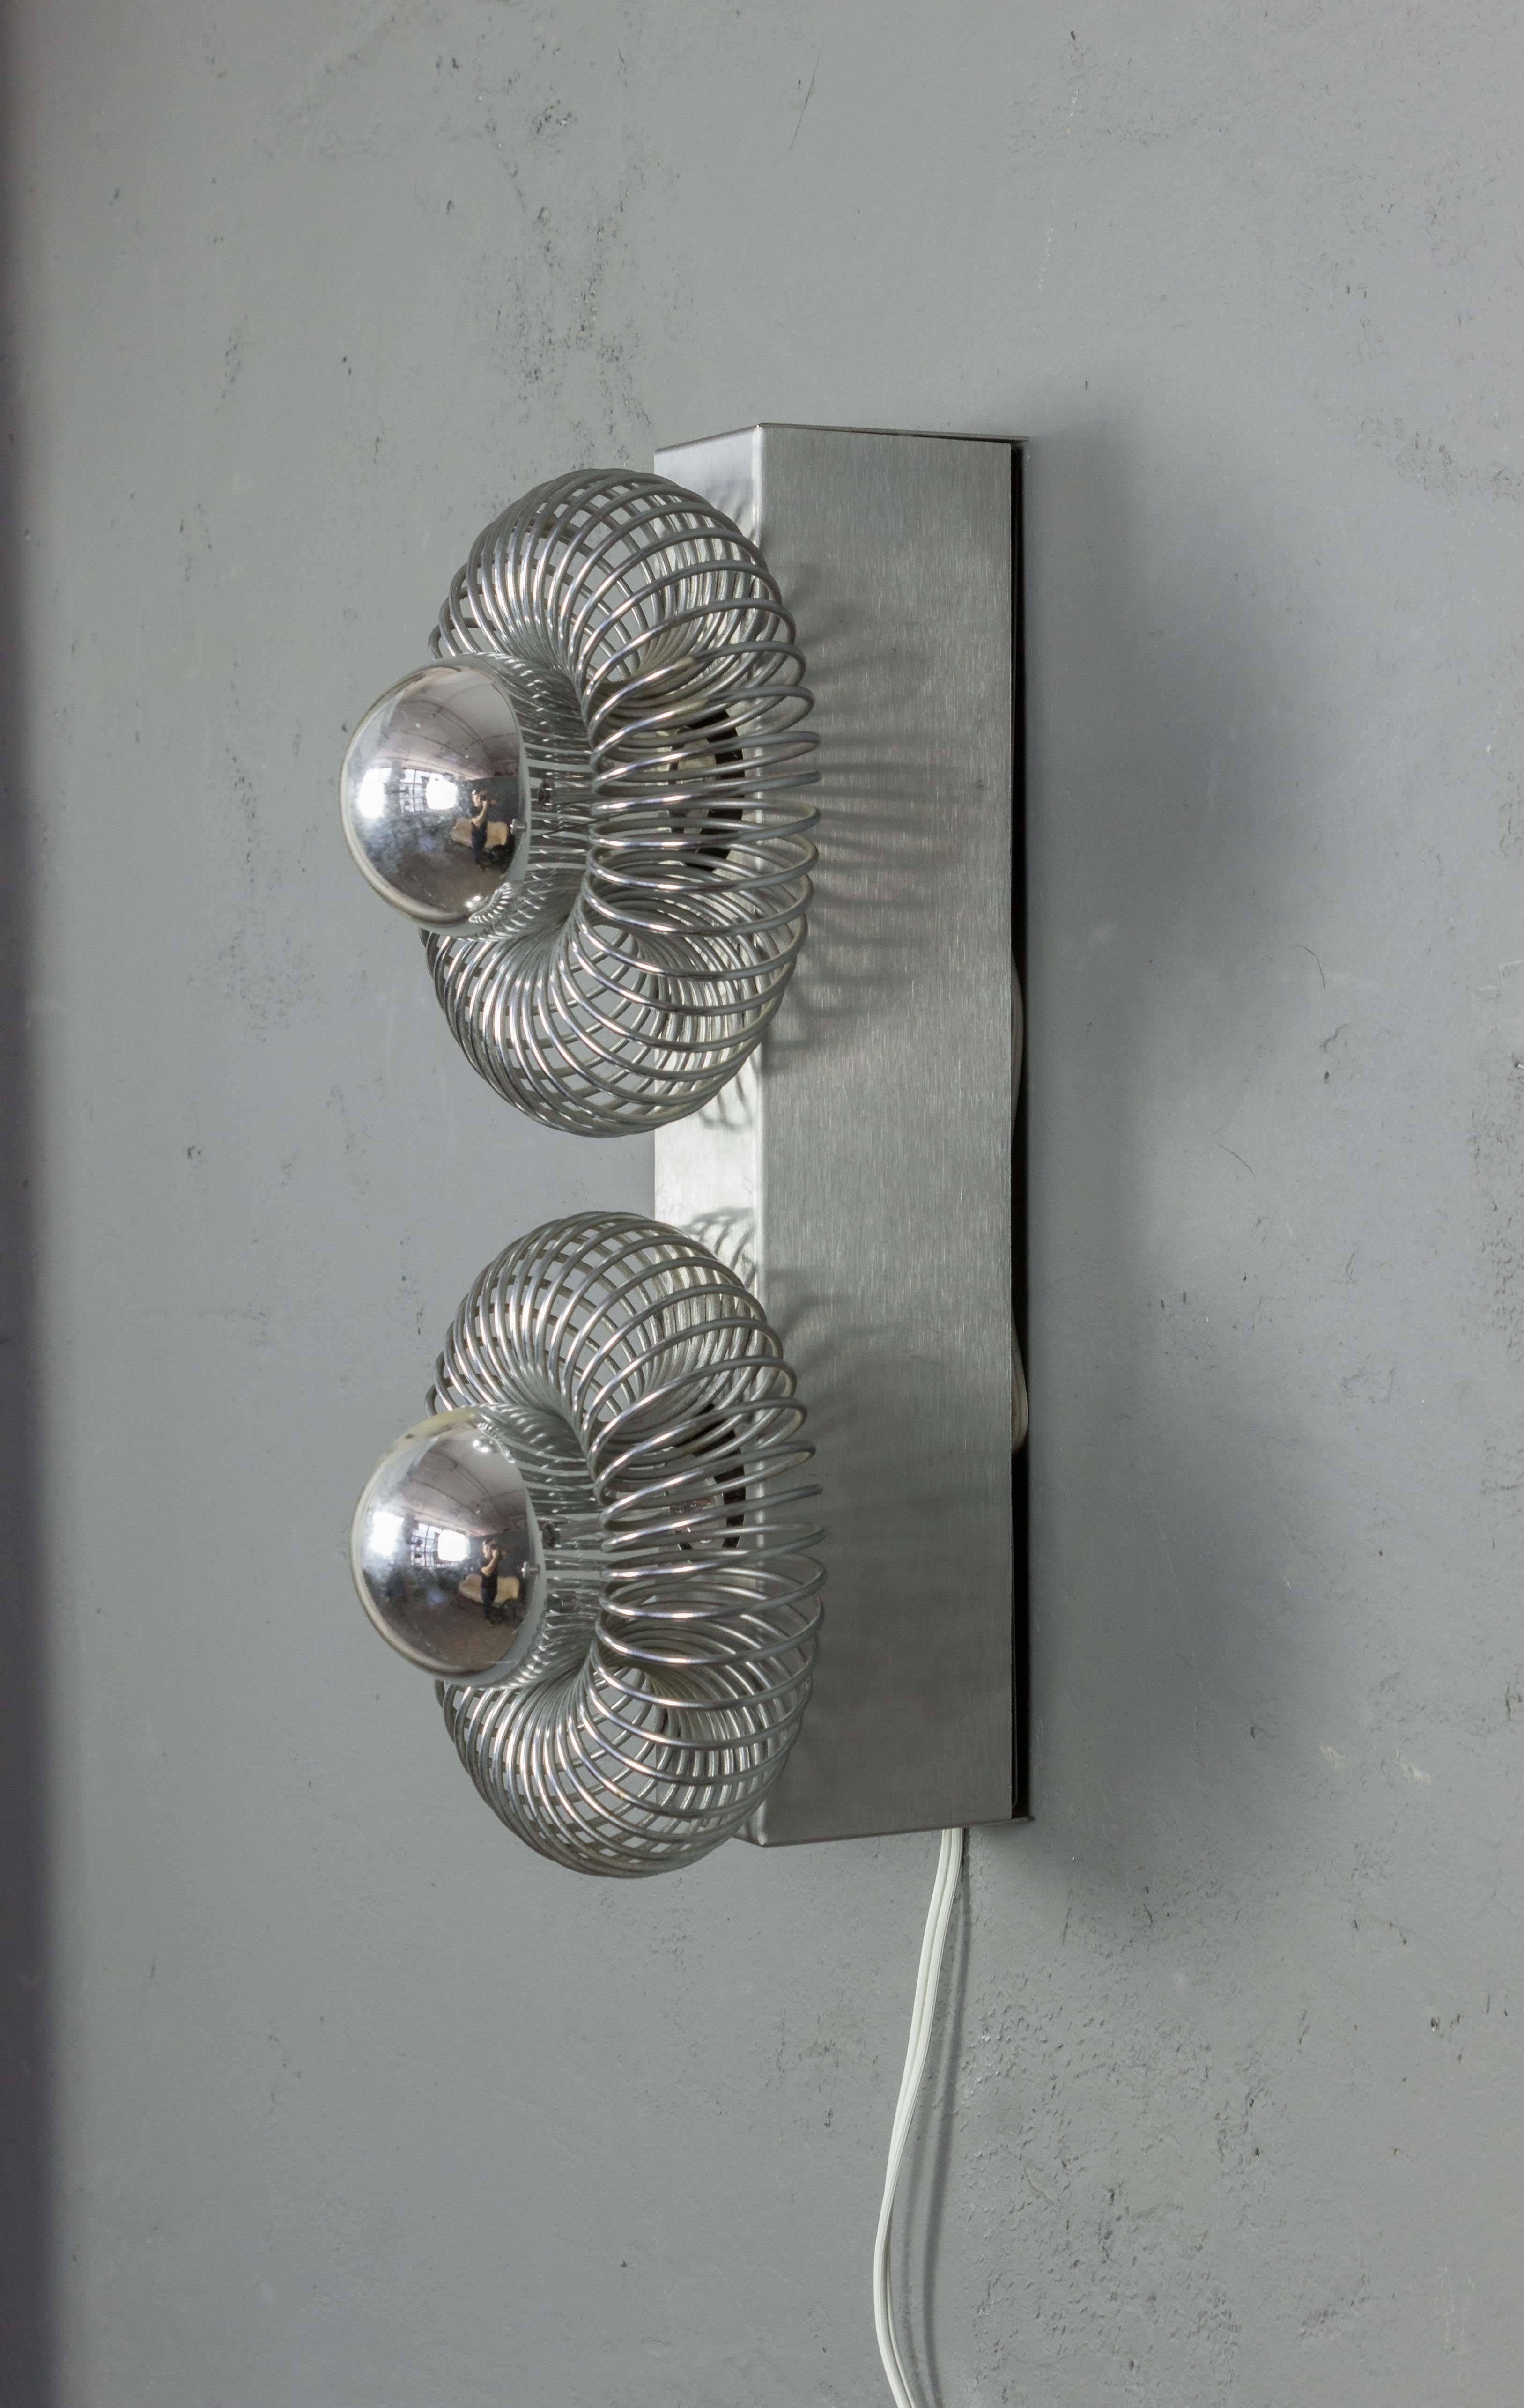 French, 1970s metal sconce with double lights. The exposed and silvered bulbs are surrounded by expandable metal enclosures of connected rings.